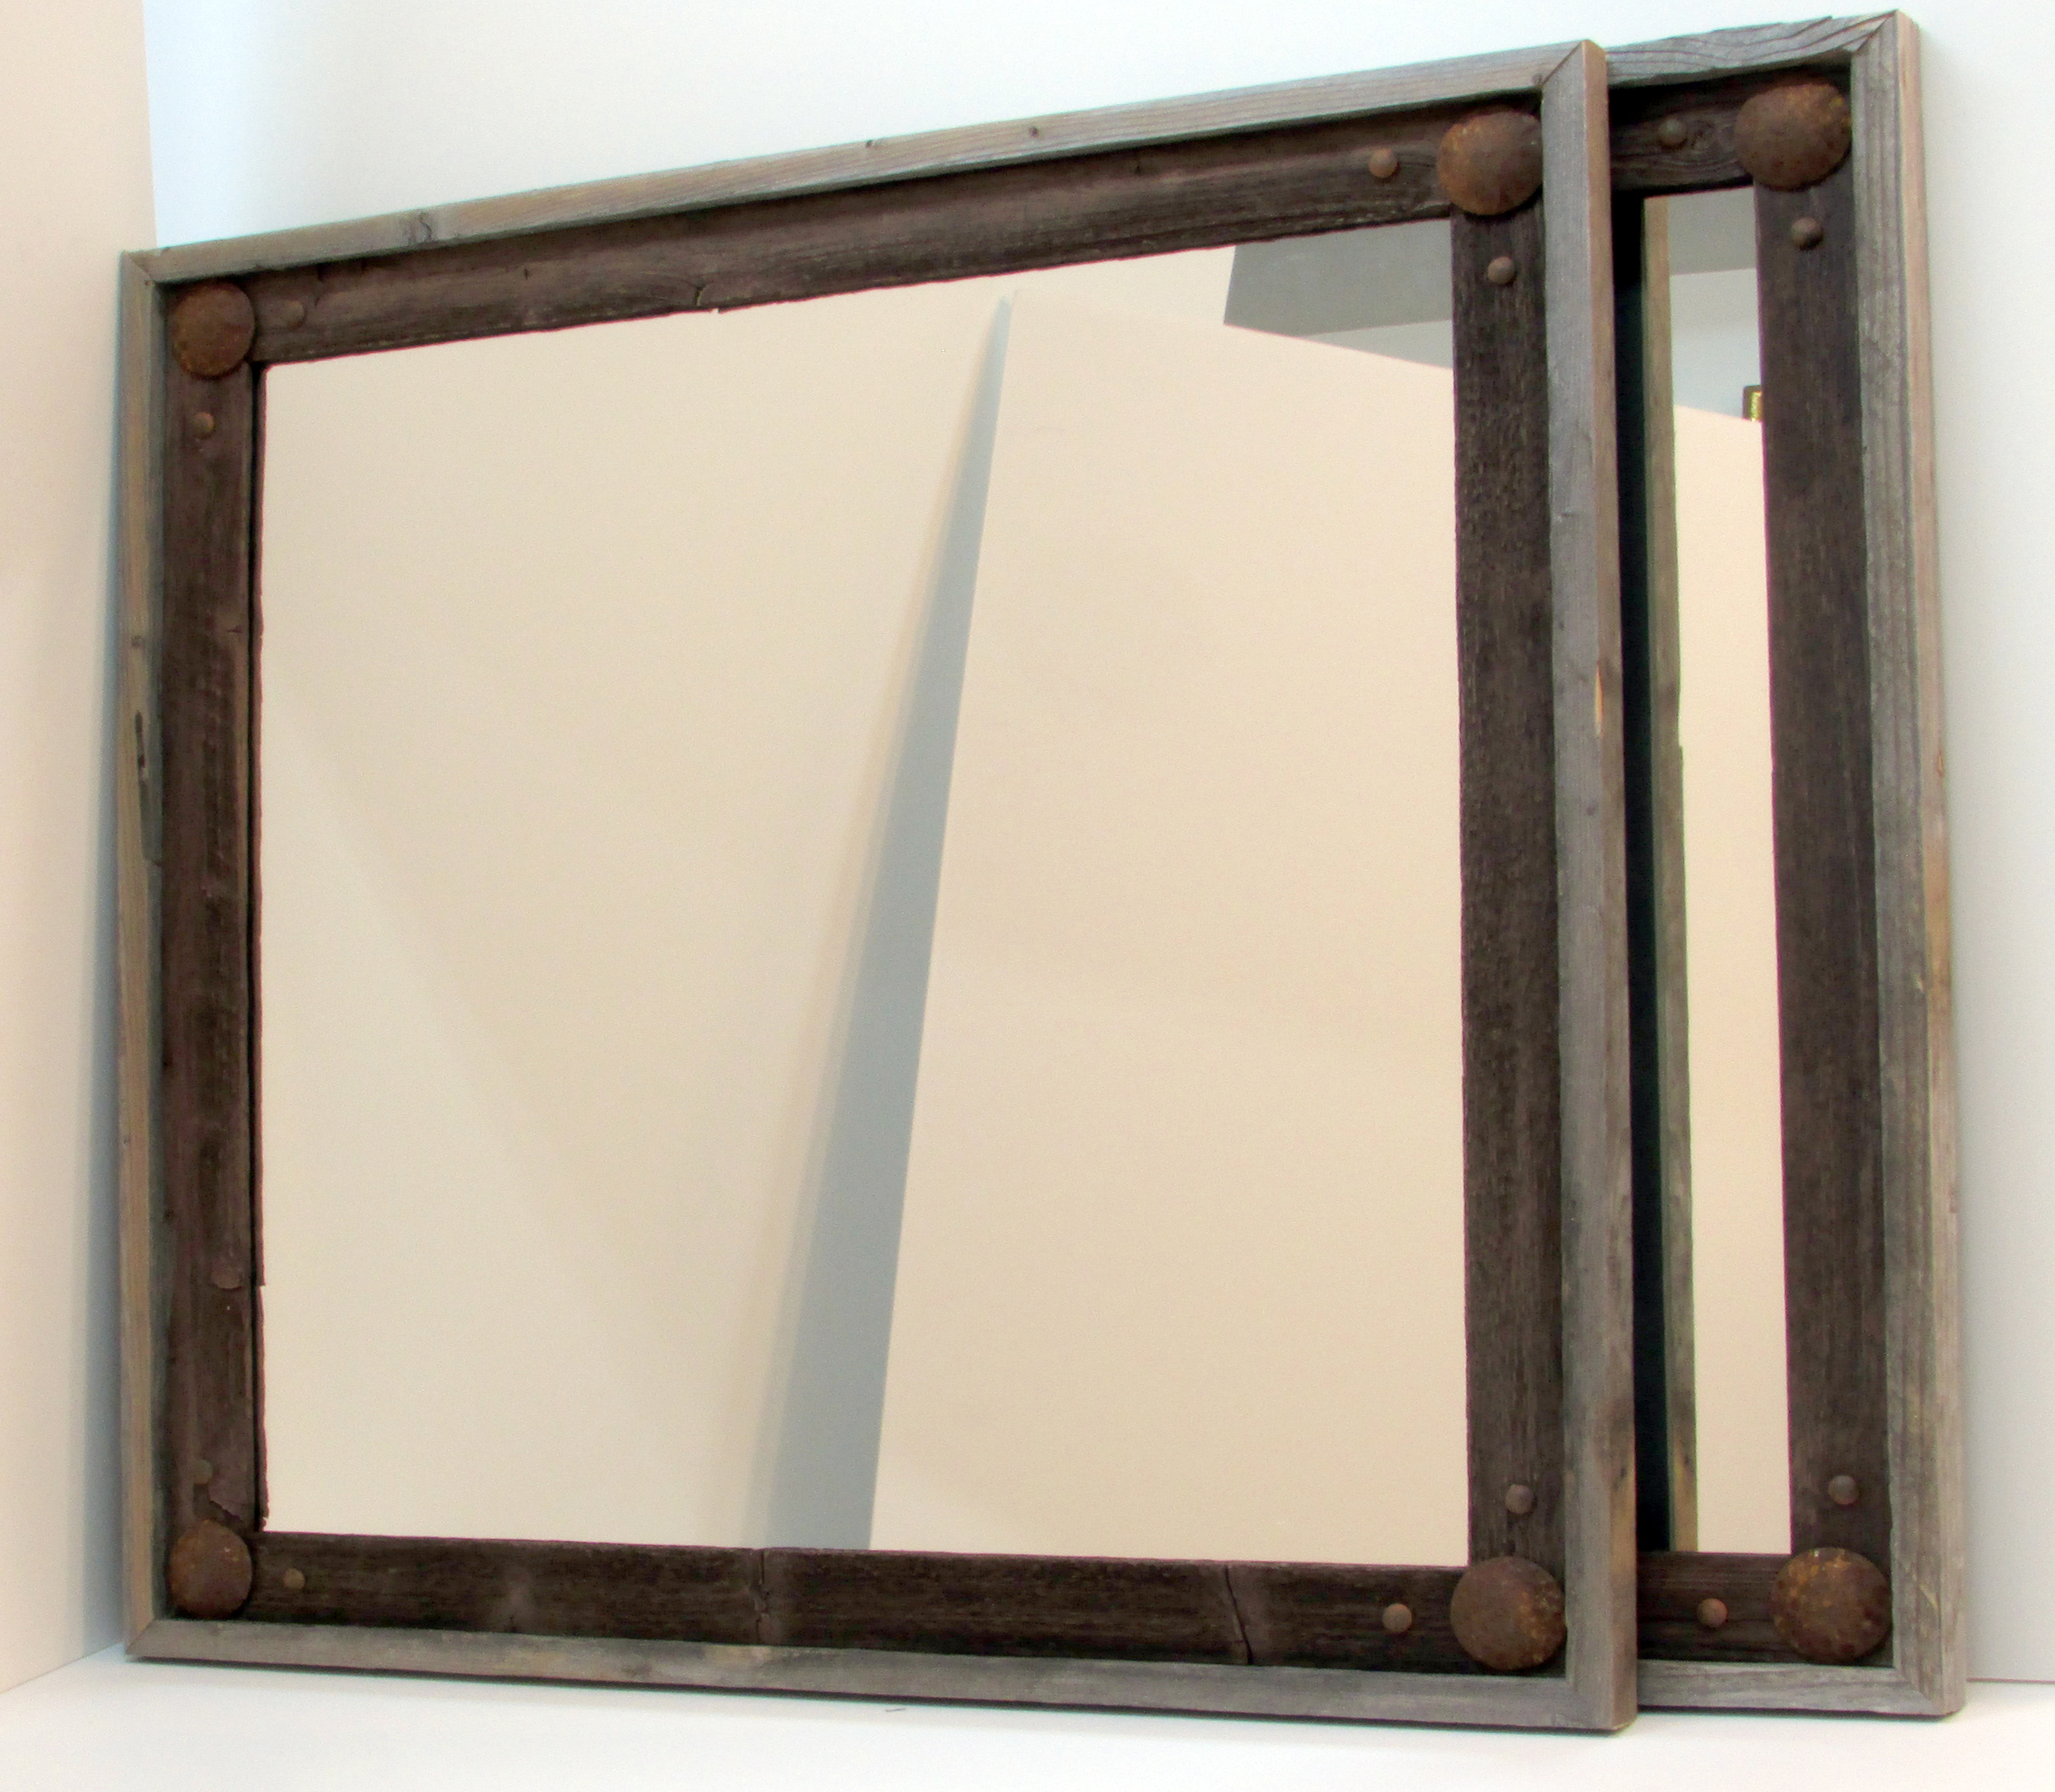 Custom Framed Mirrors from the Frame and I